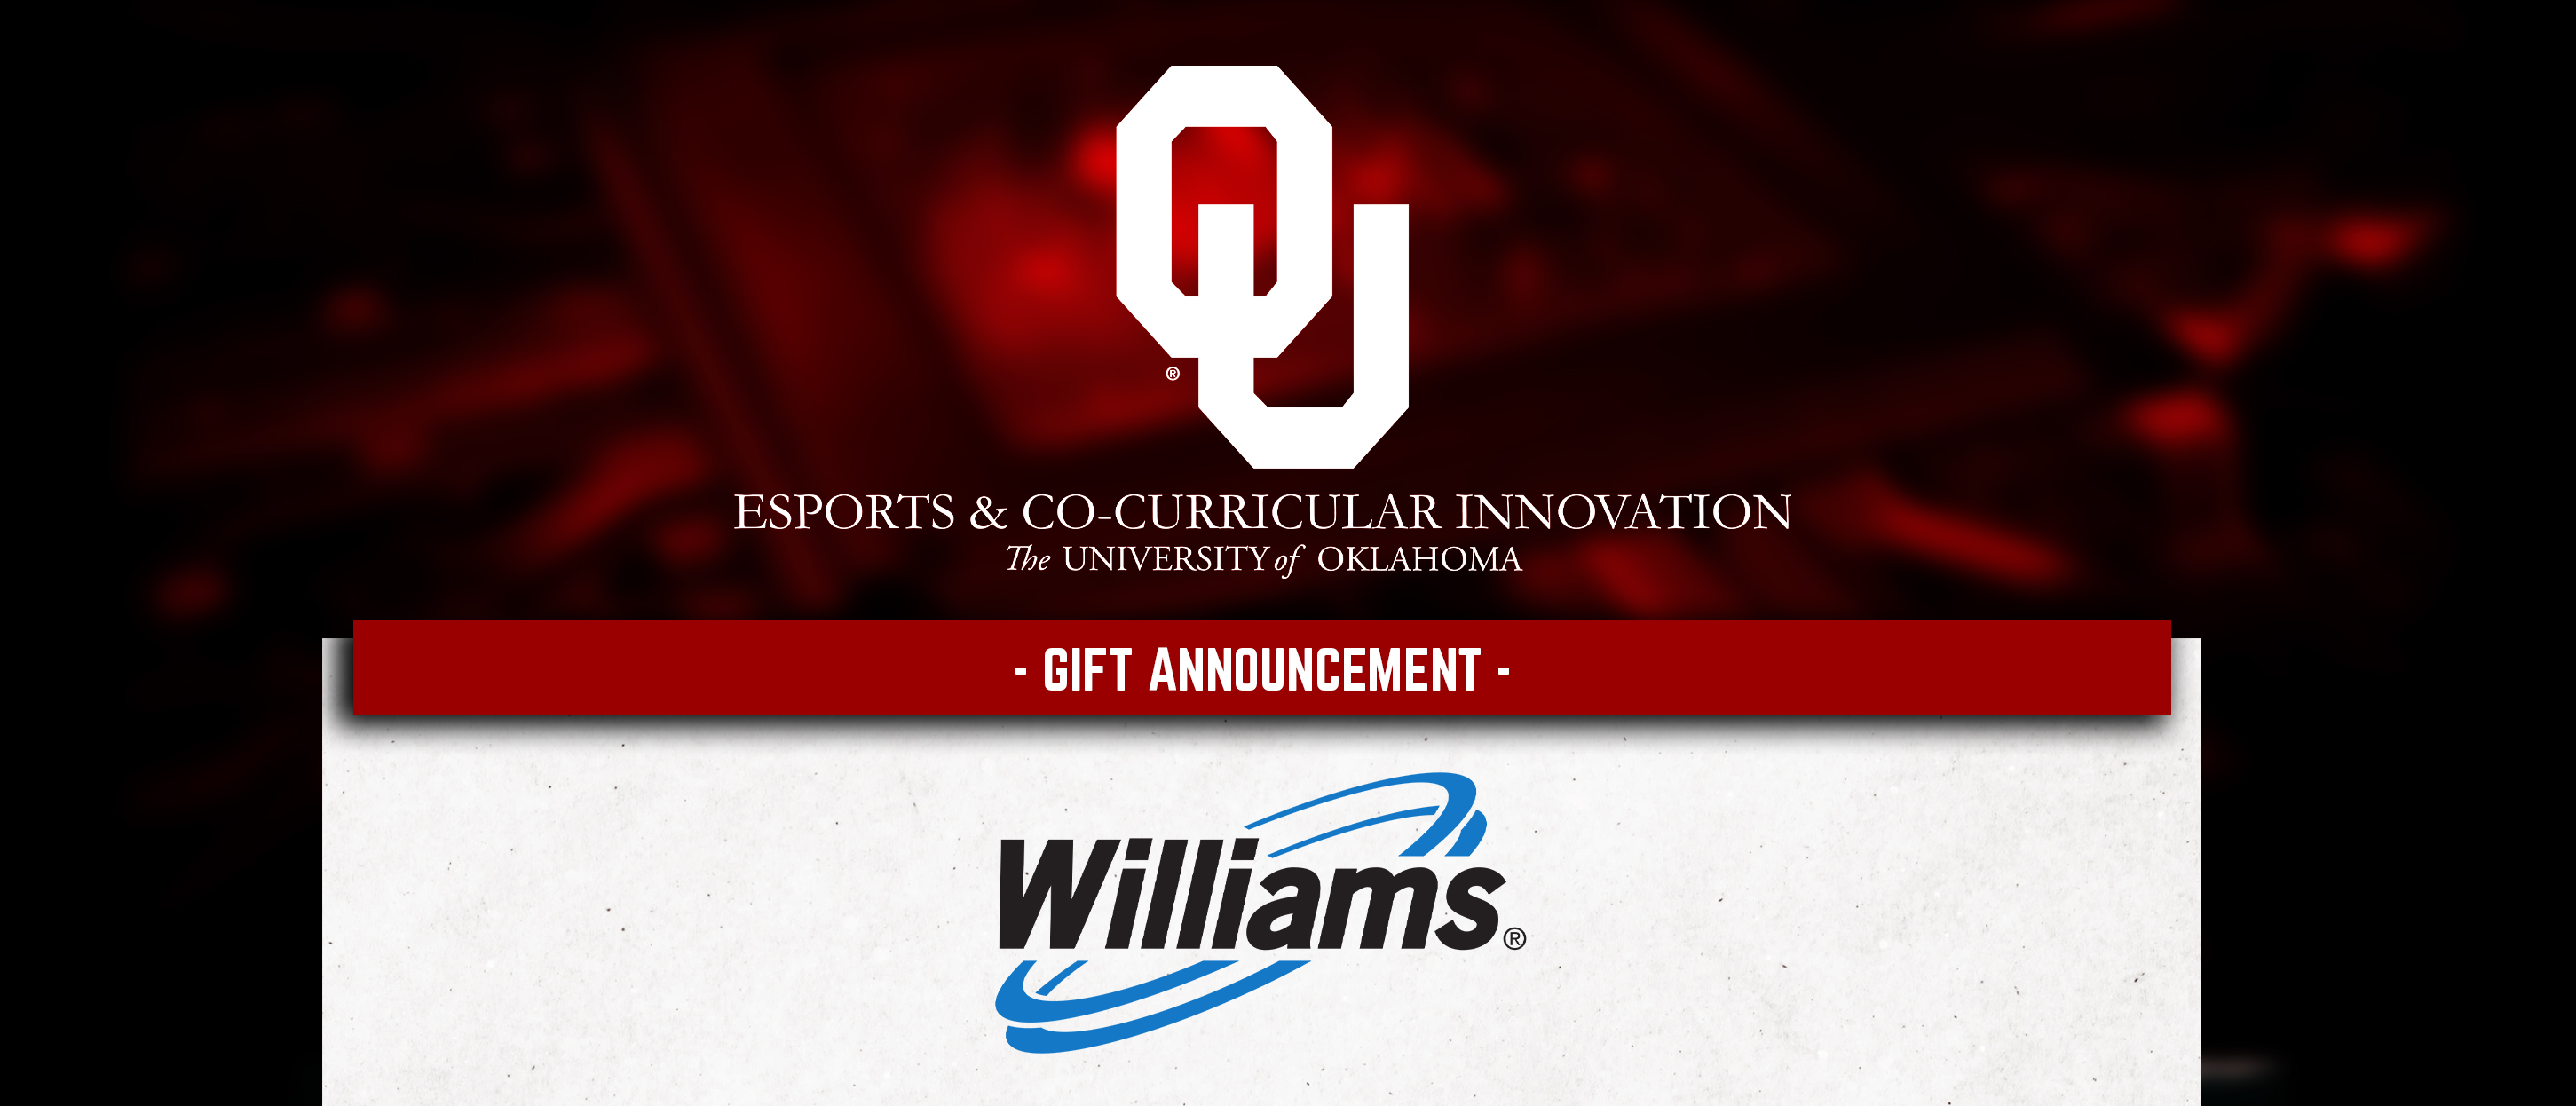 On March 3, 2021, The University of Oklahoma announced the Solidus Scholarships for esports and gaming opportunities. Our Media & News team at Sooner Esports provided a deep dive into what it all means and shares the story of Forest Dayne "Solidus" Sharp. 